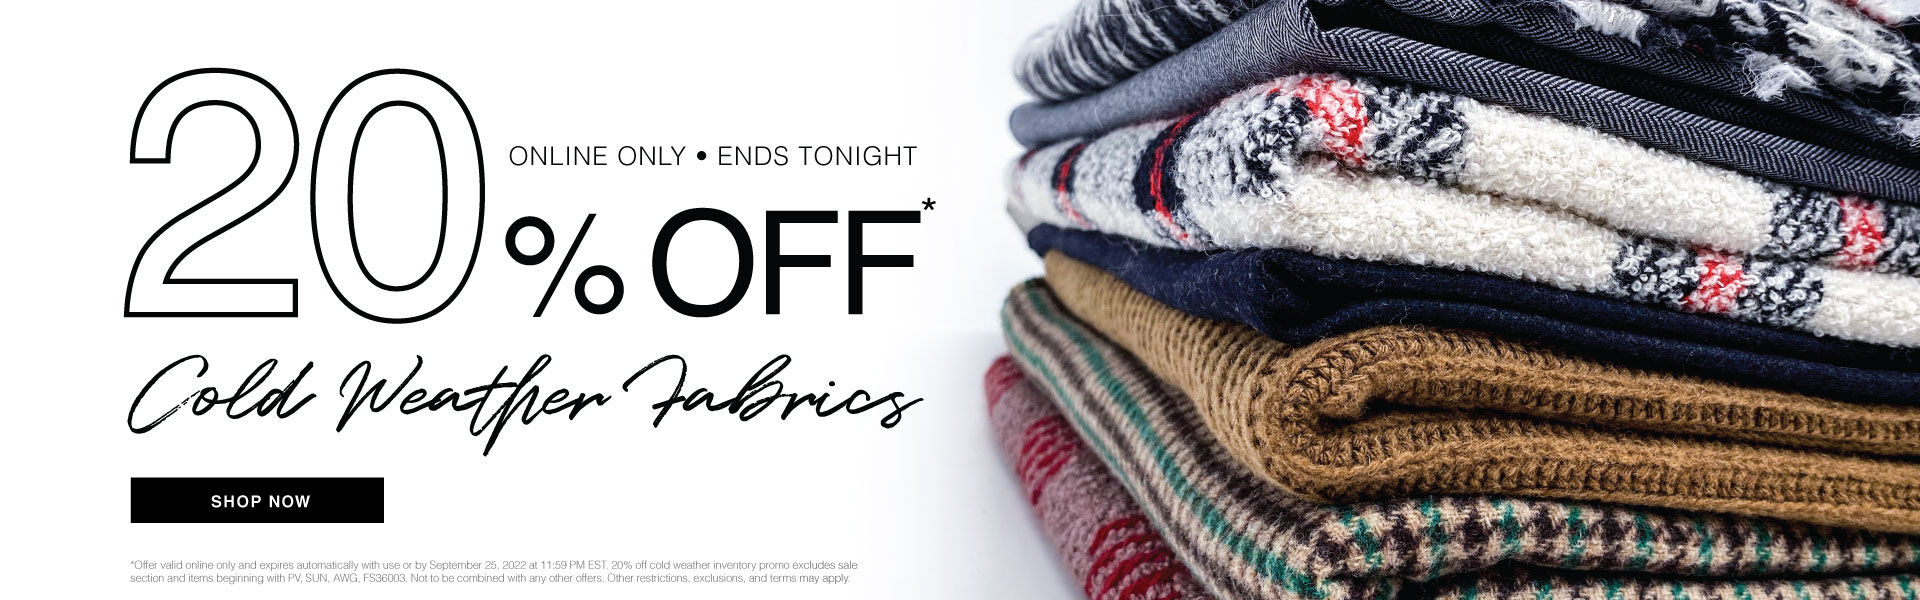 Happy Fall! Shop 20% off Cold Weather Fabrics Now - Last Chance!